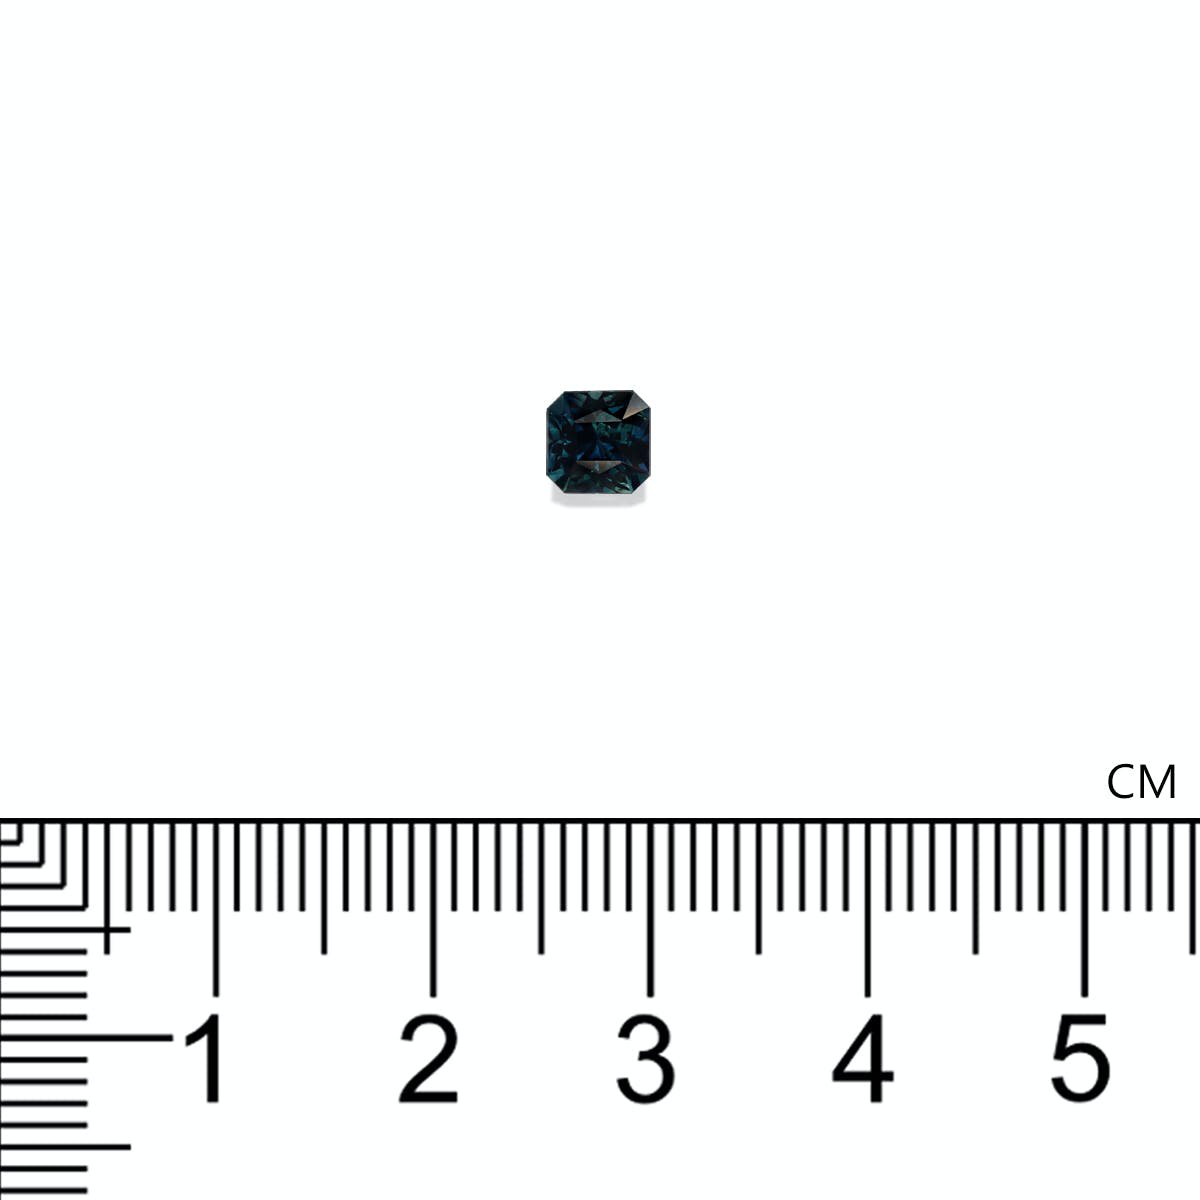 Picture of Blue Teal Sapphire 0.73ct - 4mm (TL0095)